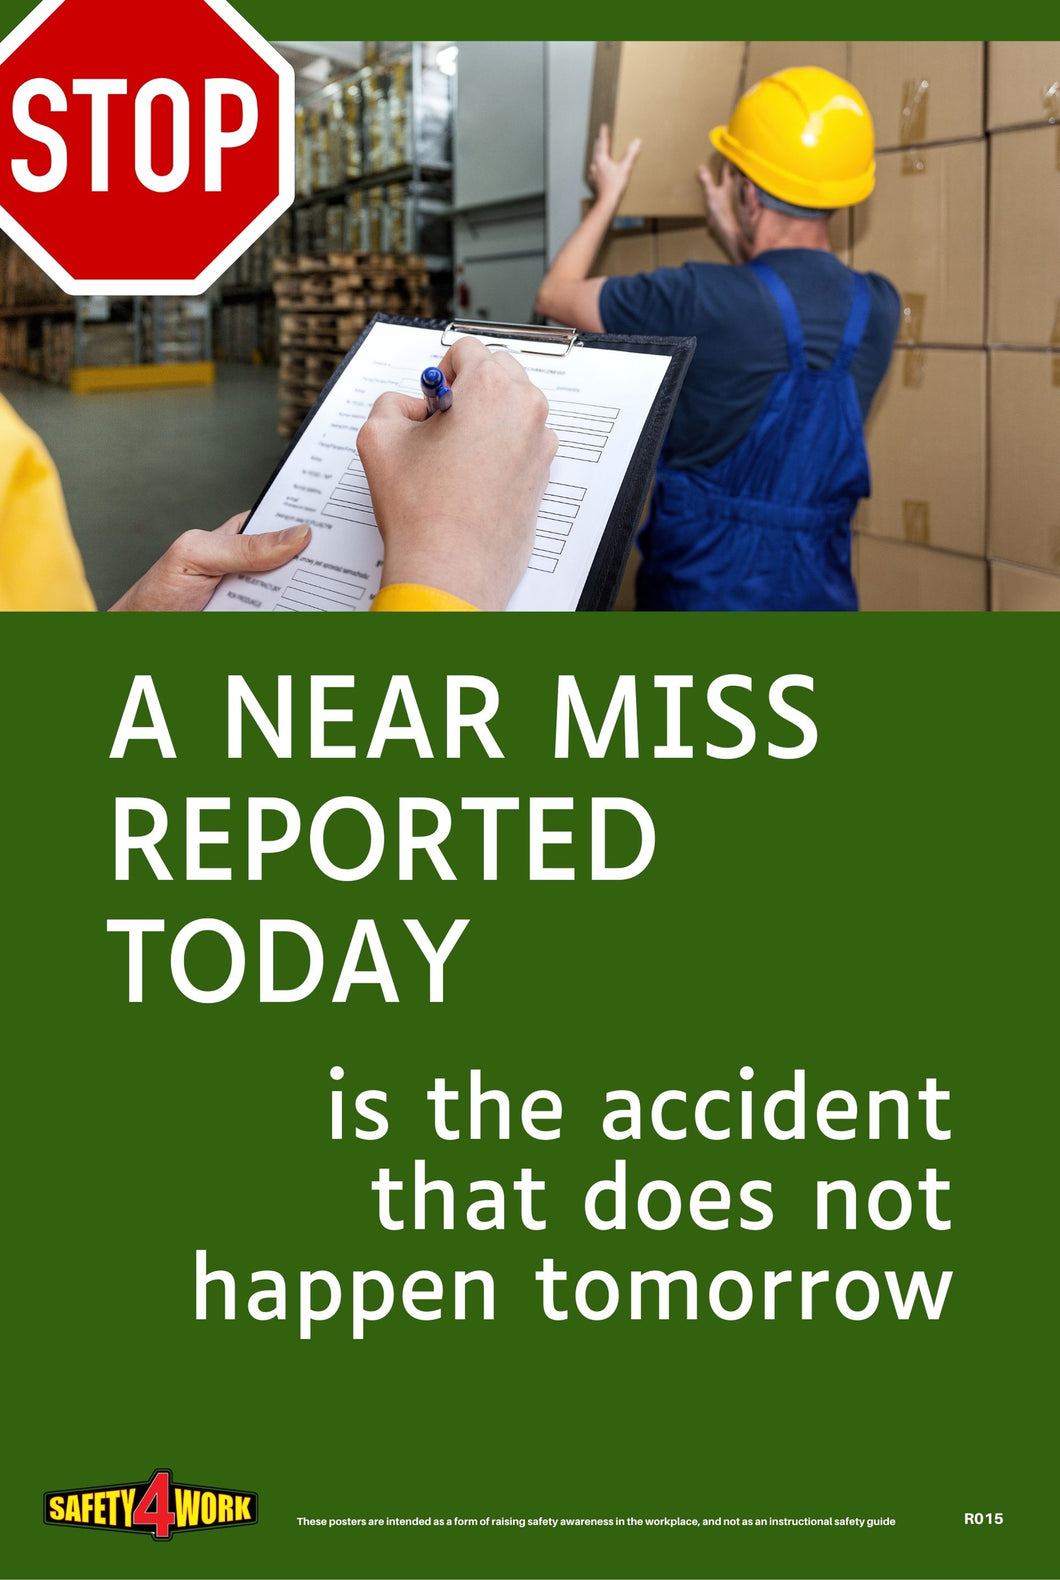 R015- Reporting Workplace Safety Poster